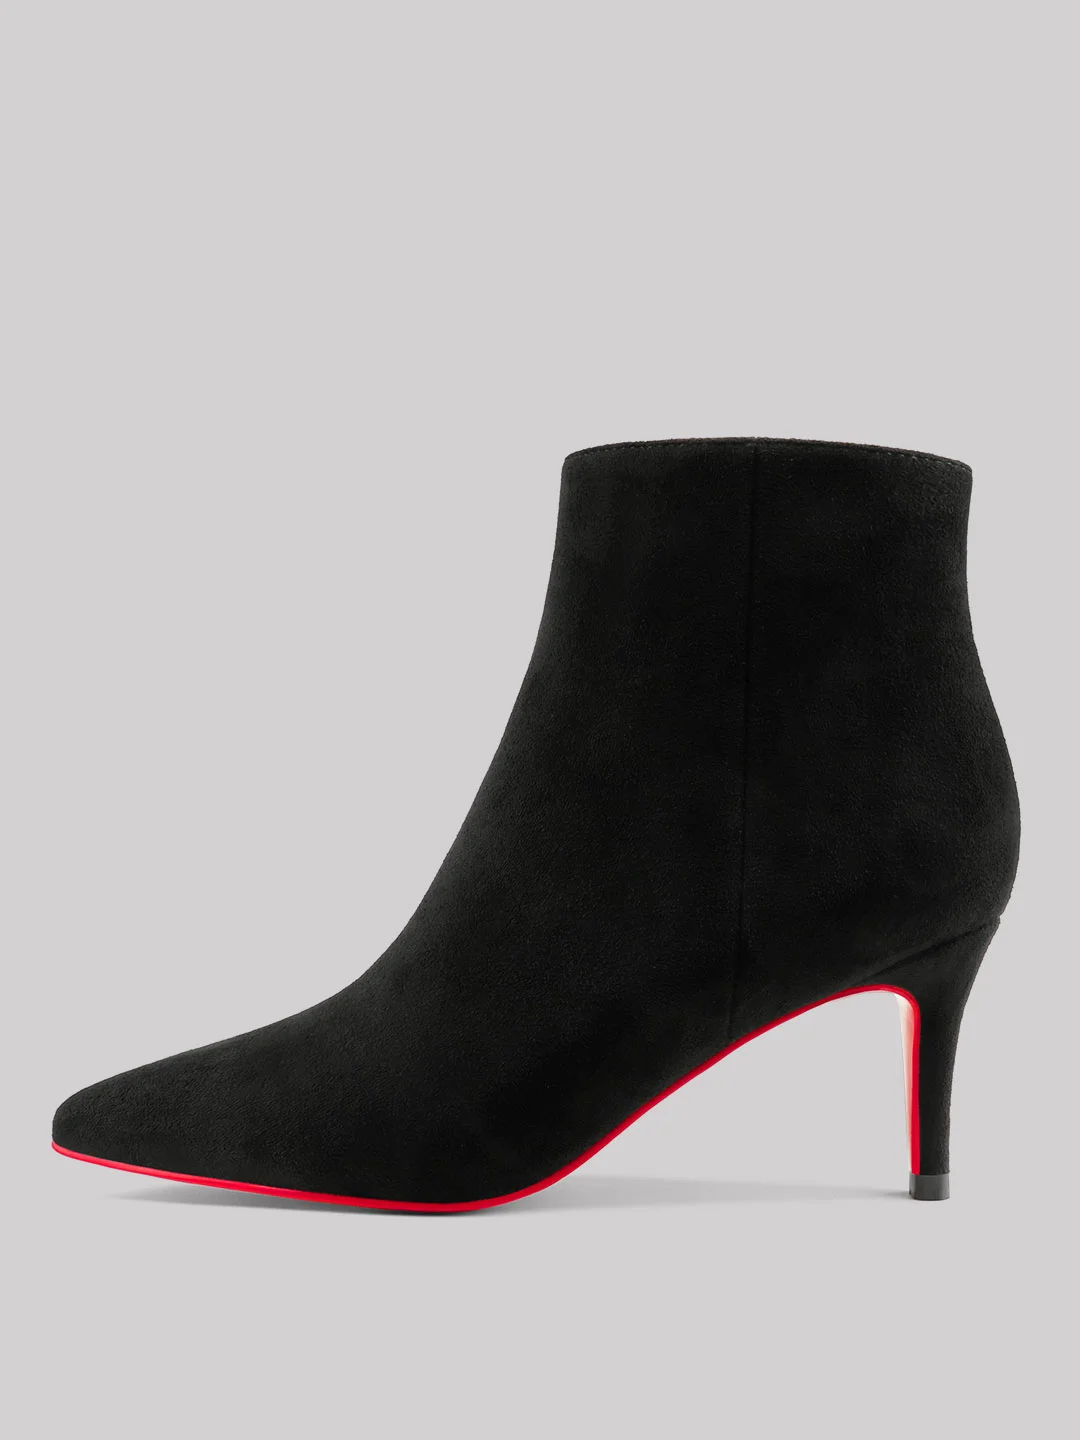 2.3" Women's Ankle Boots Closed Pointed Toe Red Bottoms Stilettos Booties